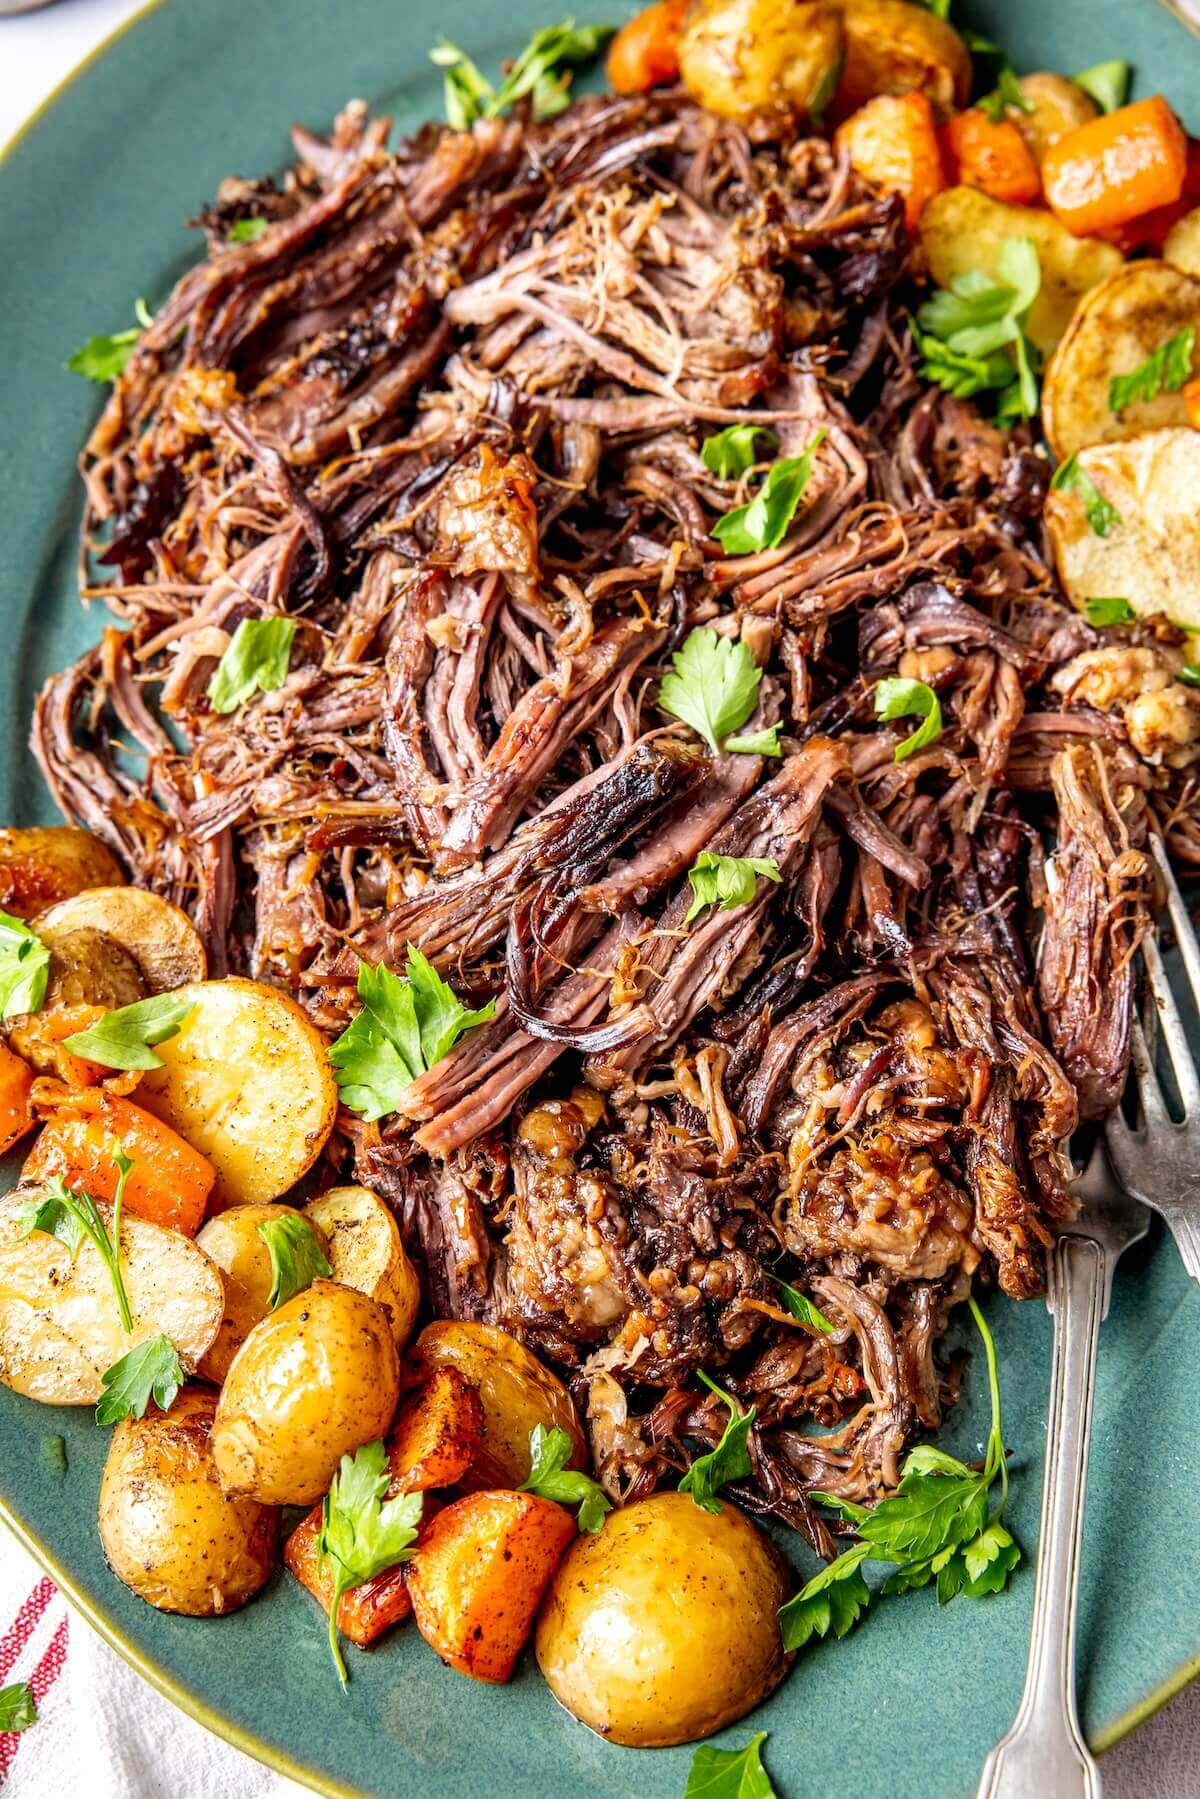 Viral Chuck Roast with Potatoes and Carrots - Olivia Adriance